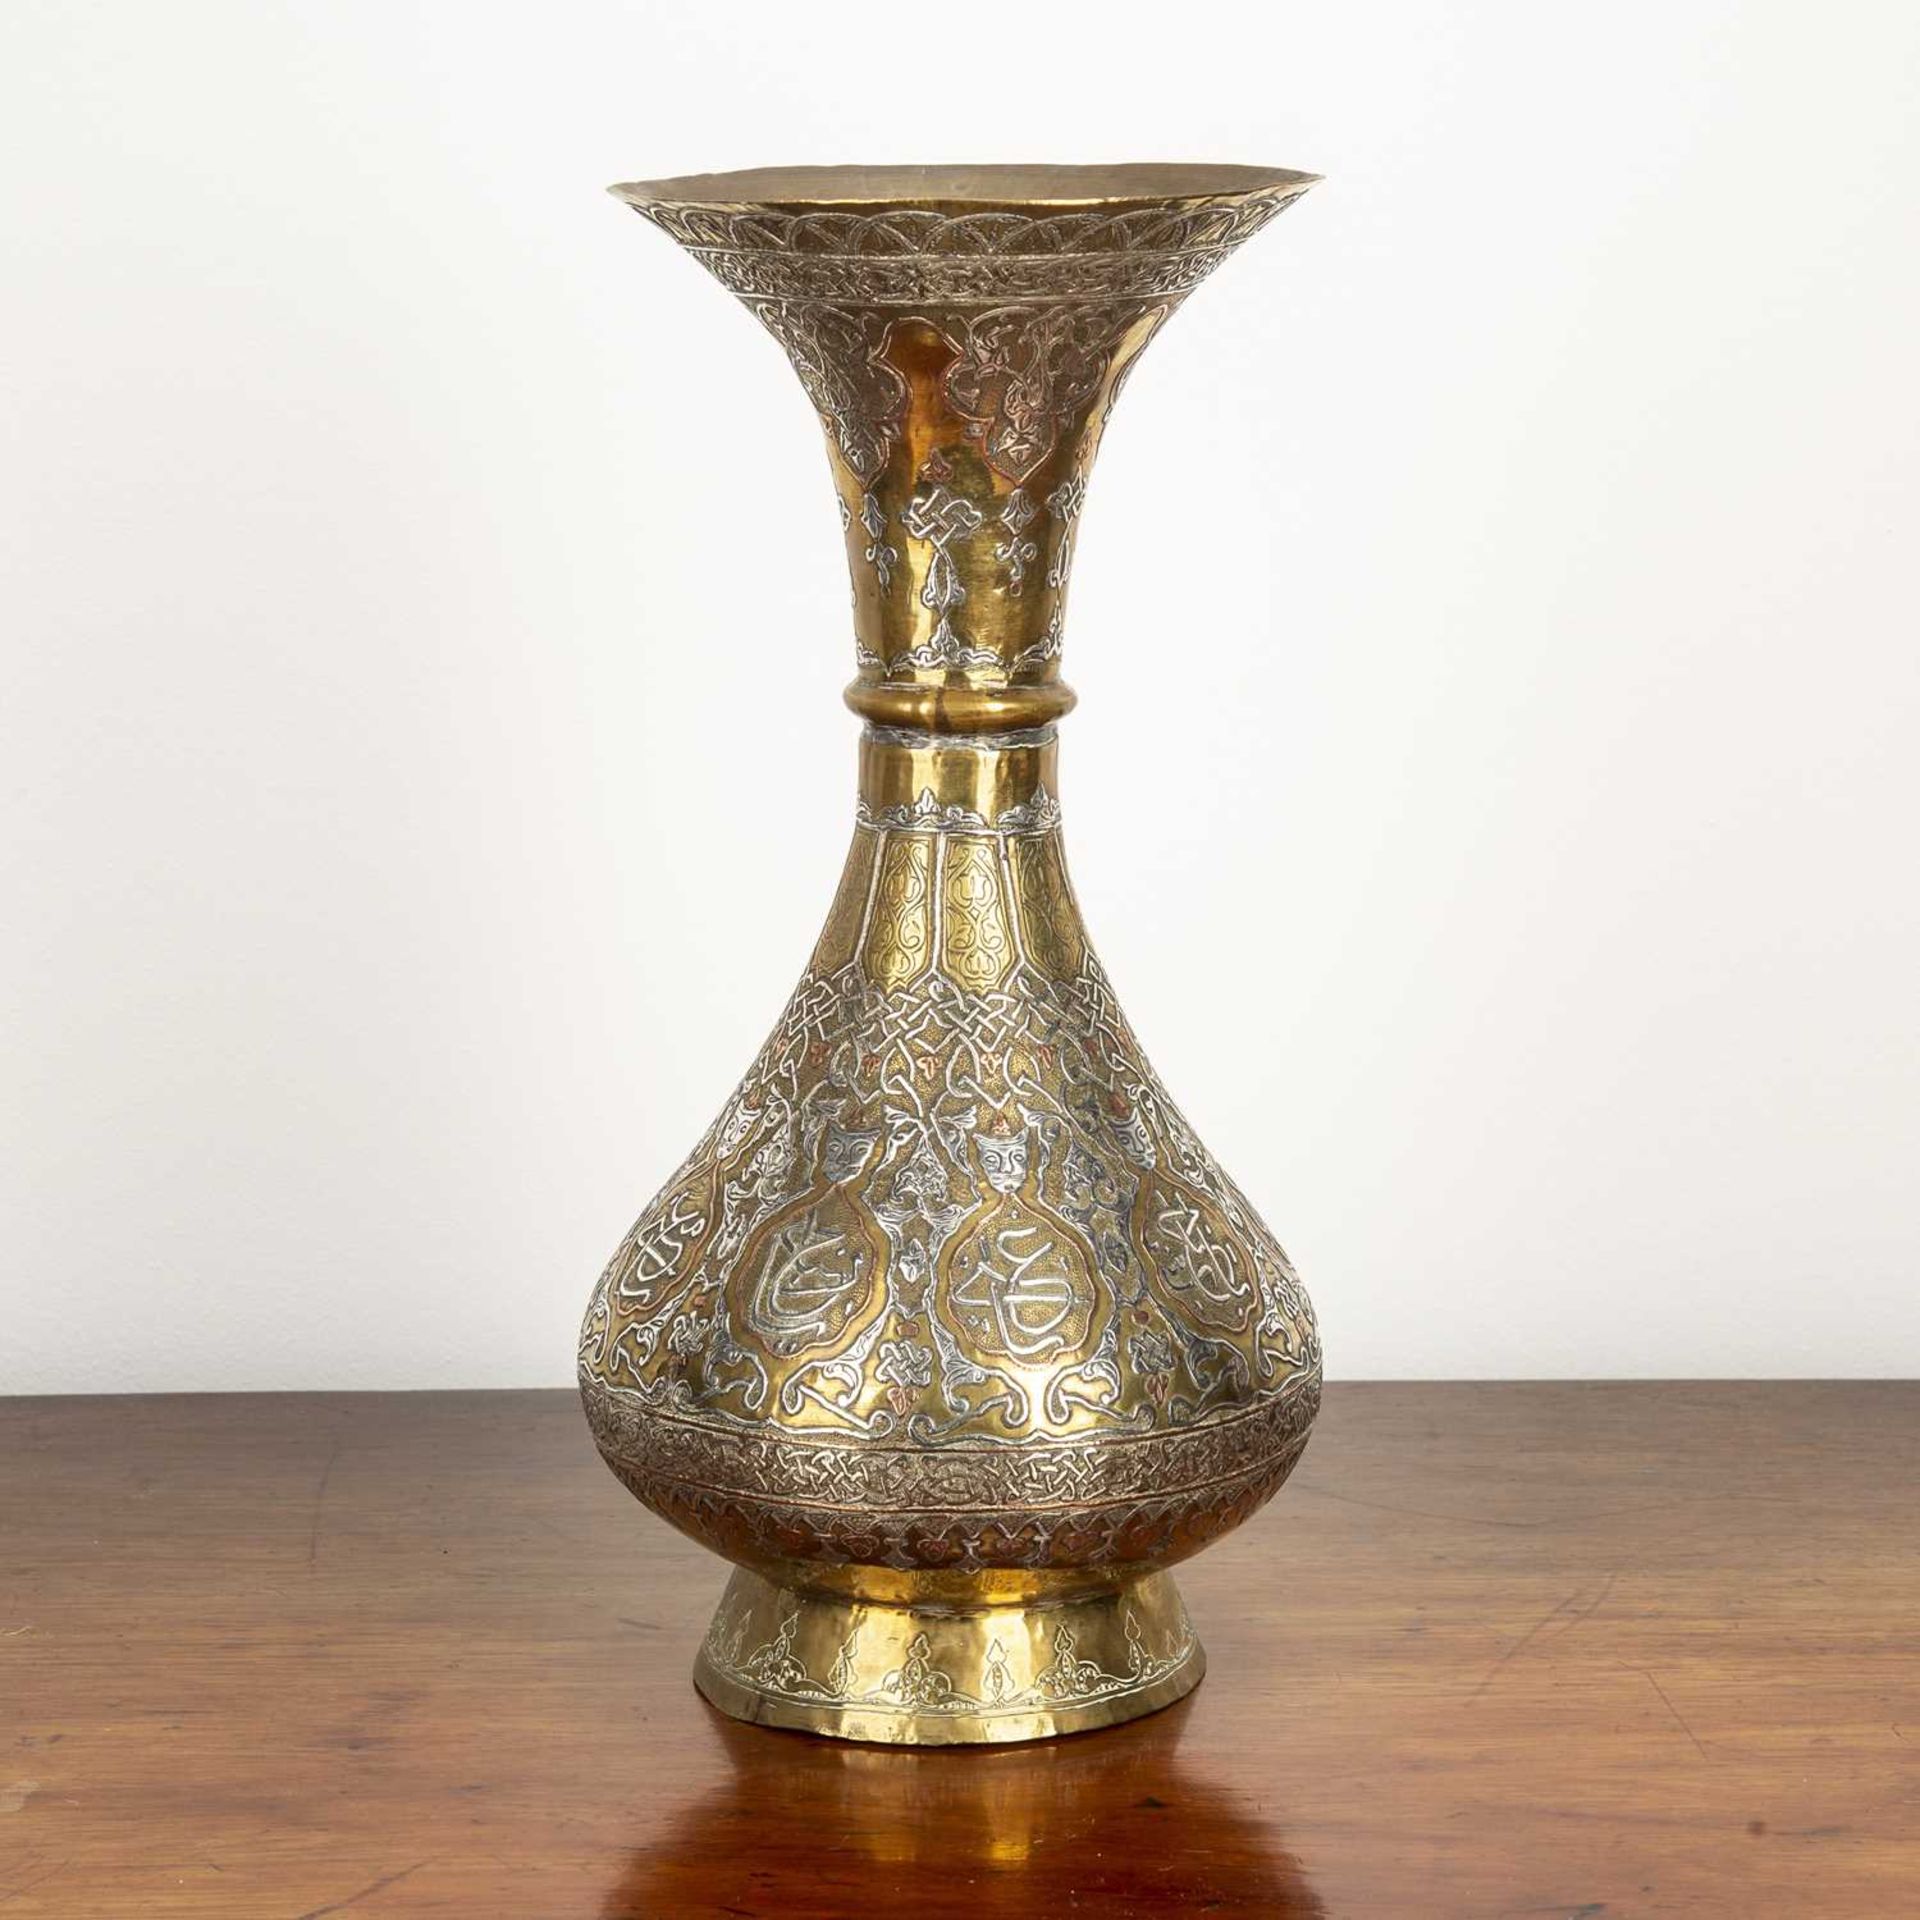 Silver inlay brass vase Iranian, decorated with figures and calligraphy, 34cm highAt present, - Bild 2 aus 2